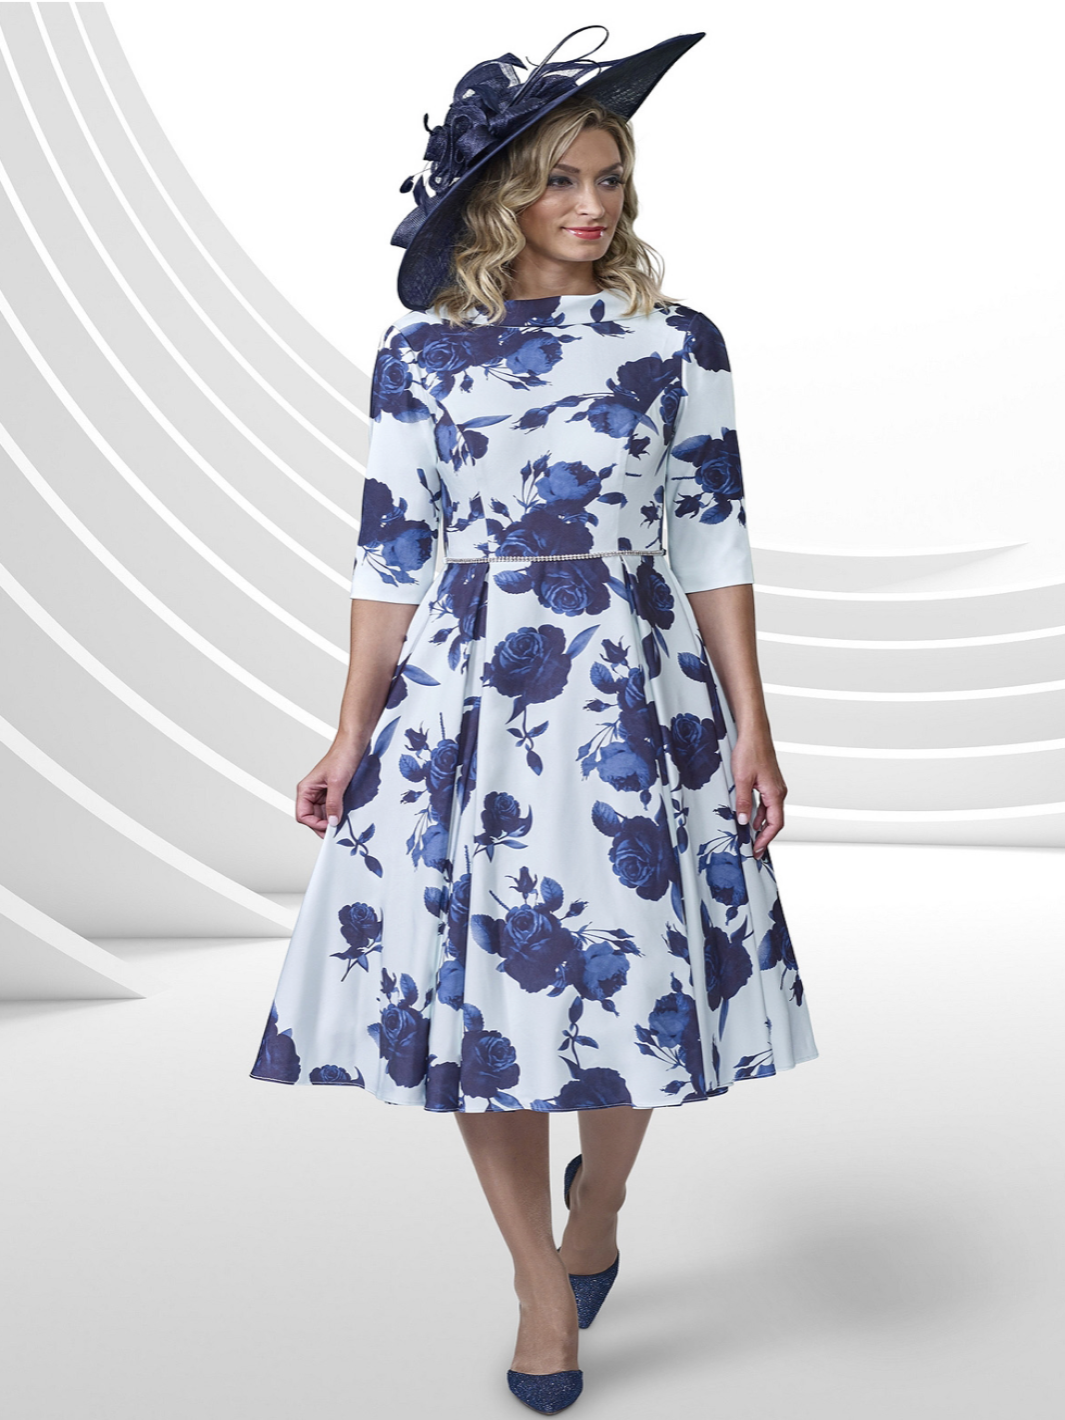 Veromia V08144 - Mint / Navy-Mother of the bride- mother of the groom -Nicola Ross